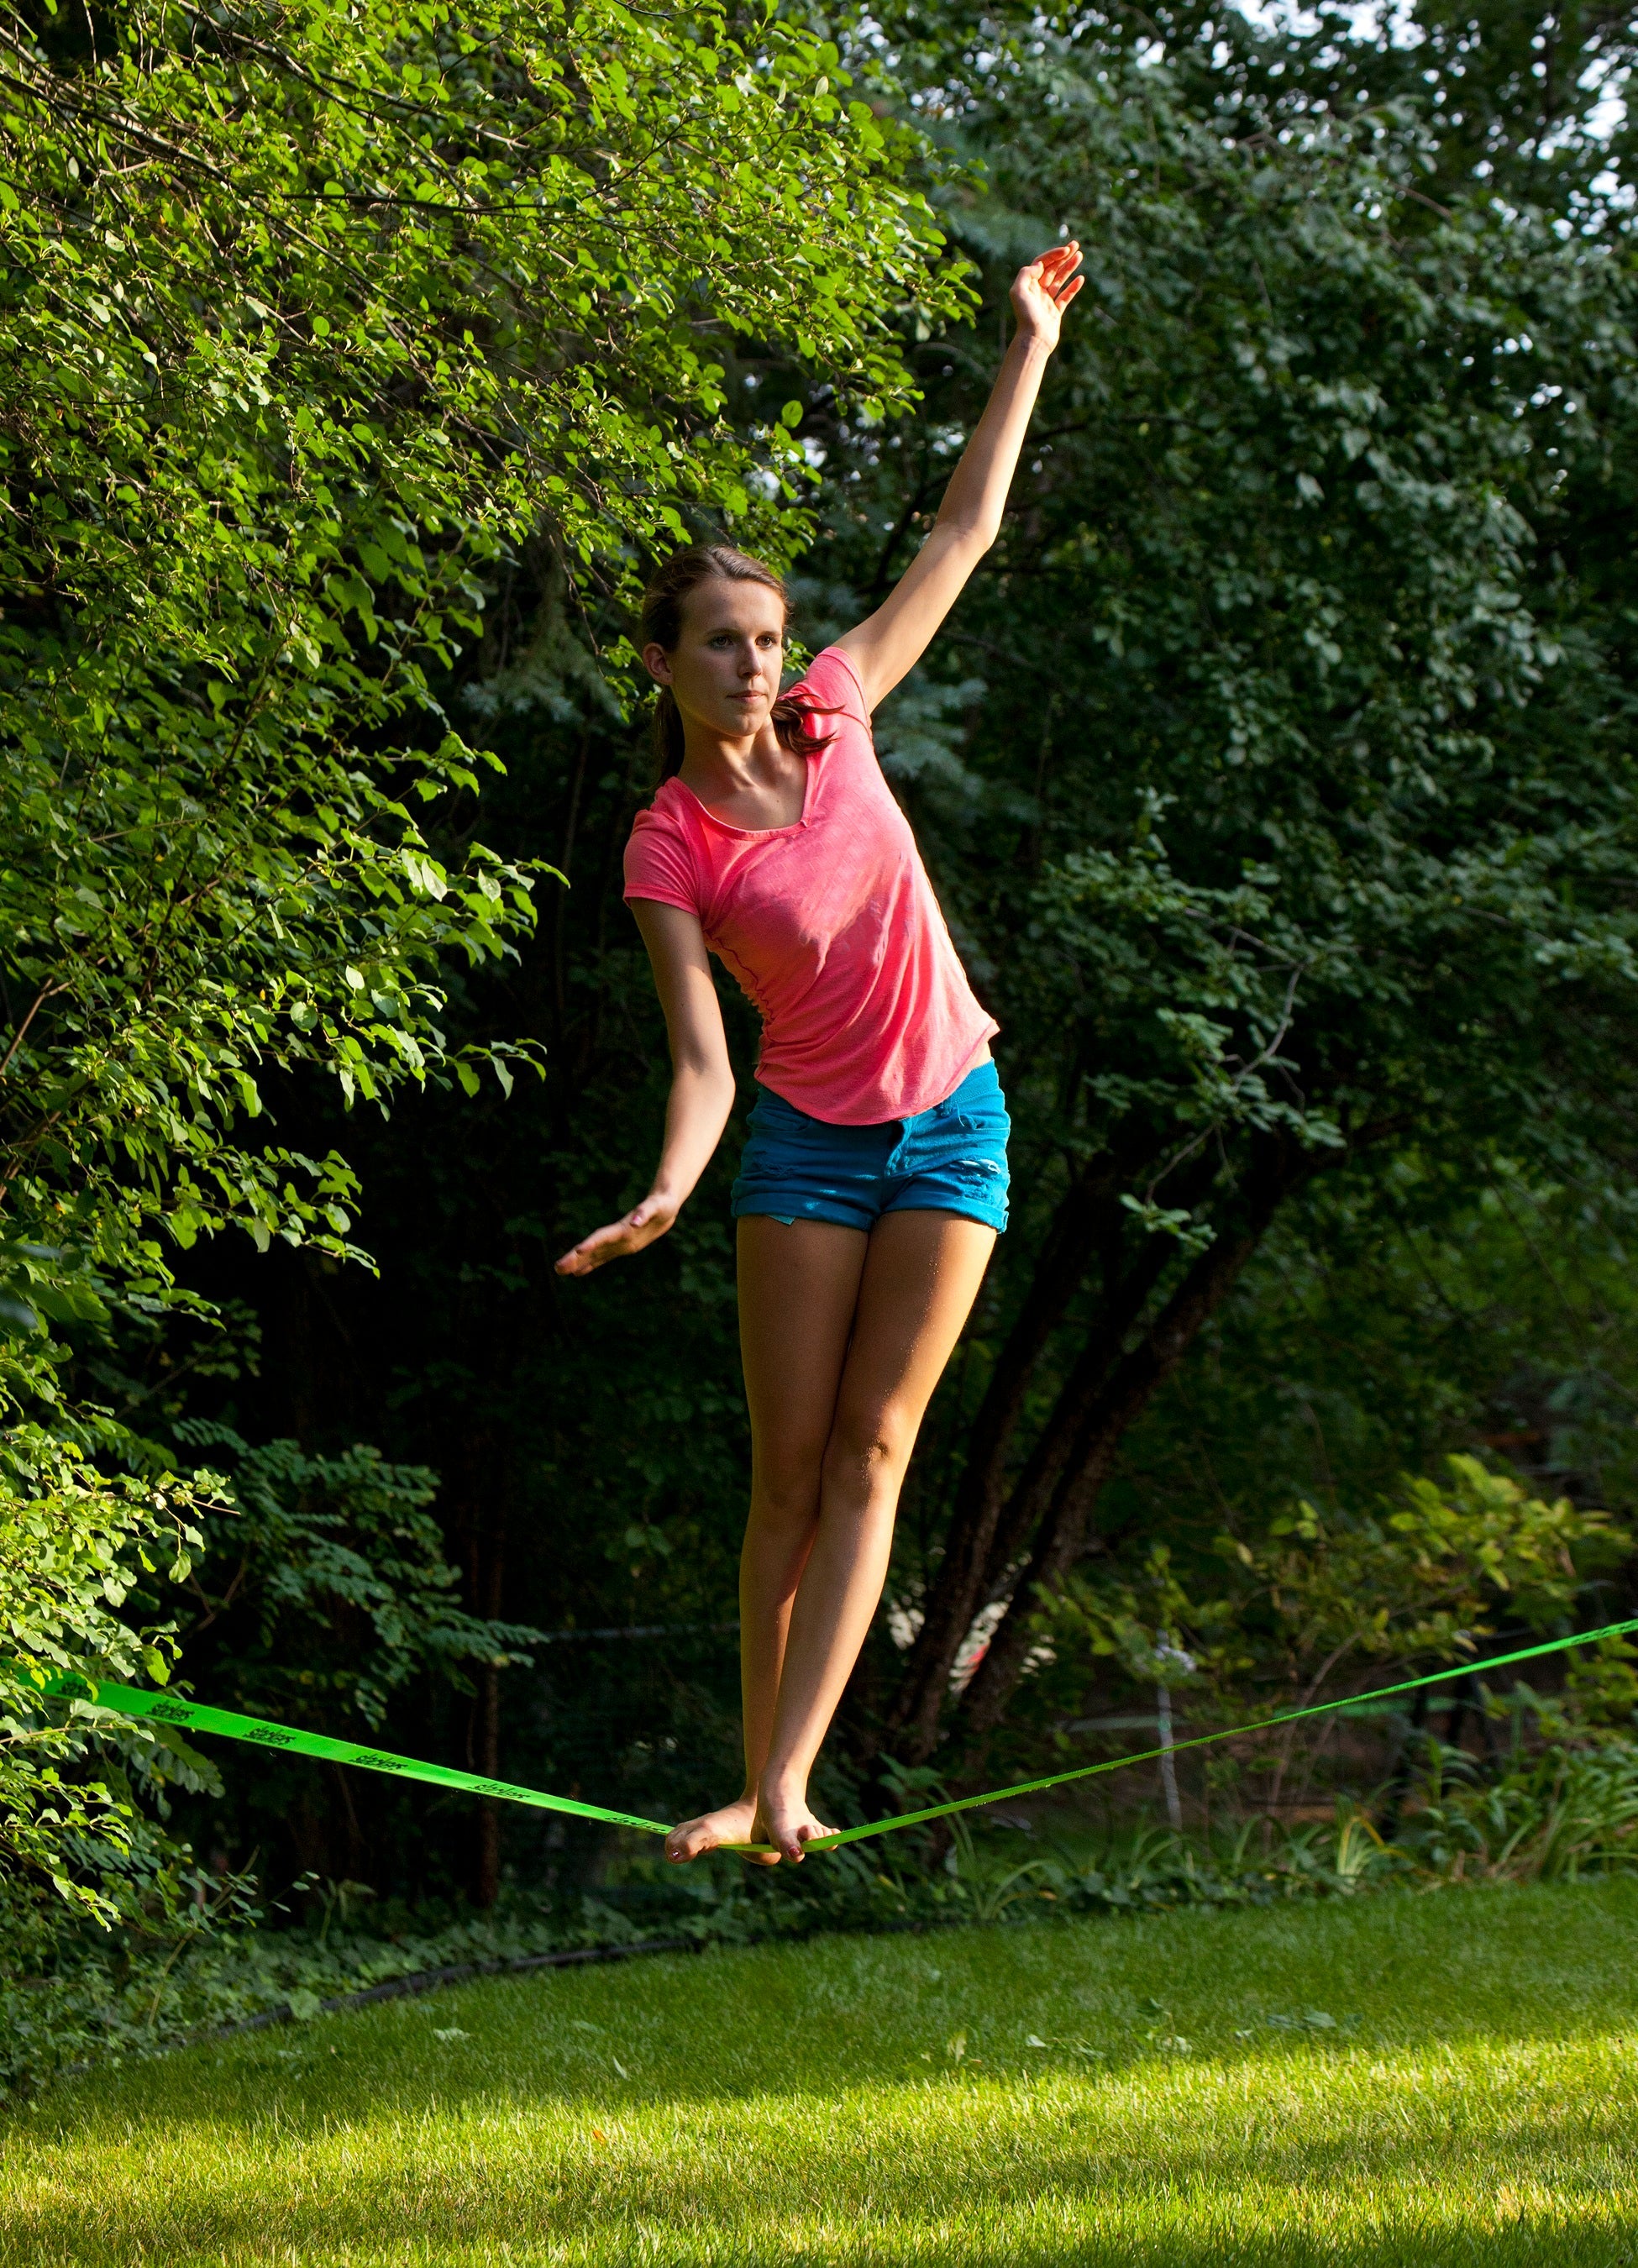 Get Out!™ Full Classic Slackline Kit with Helpline, Tree Protectors and  Carry Bag 